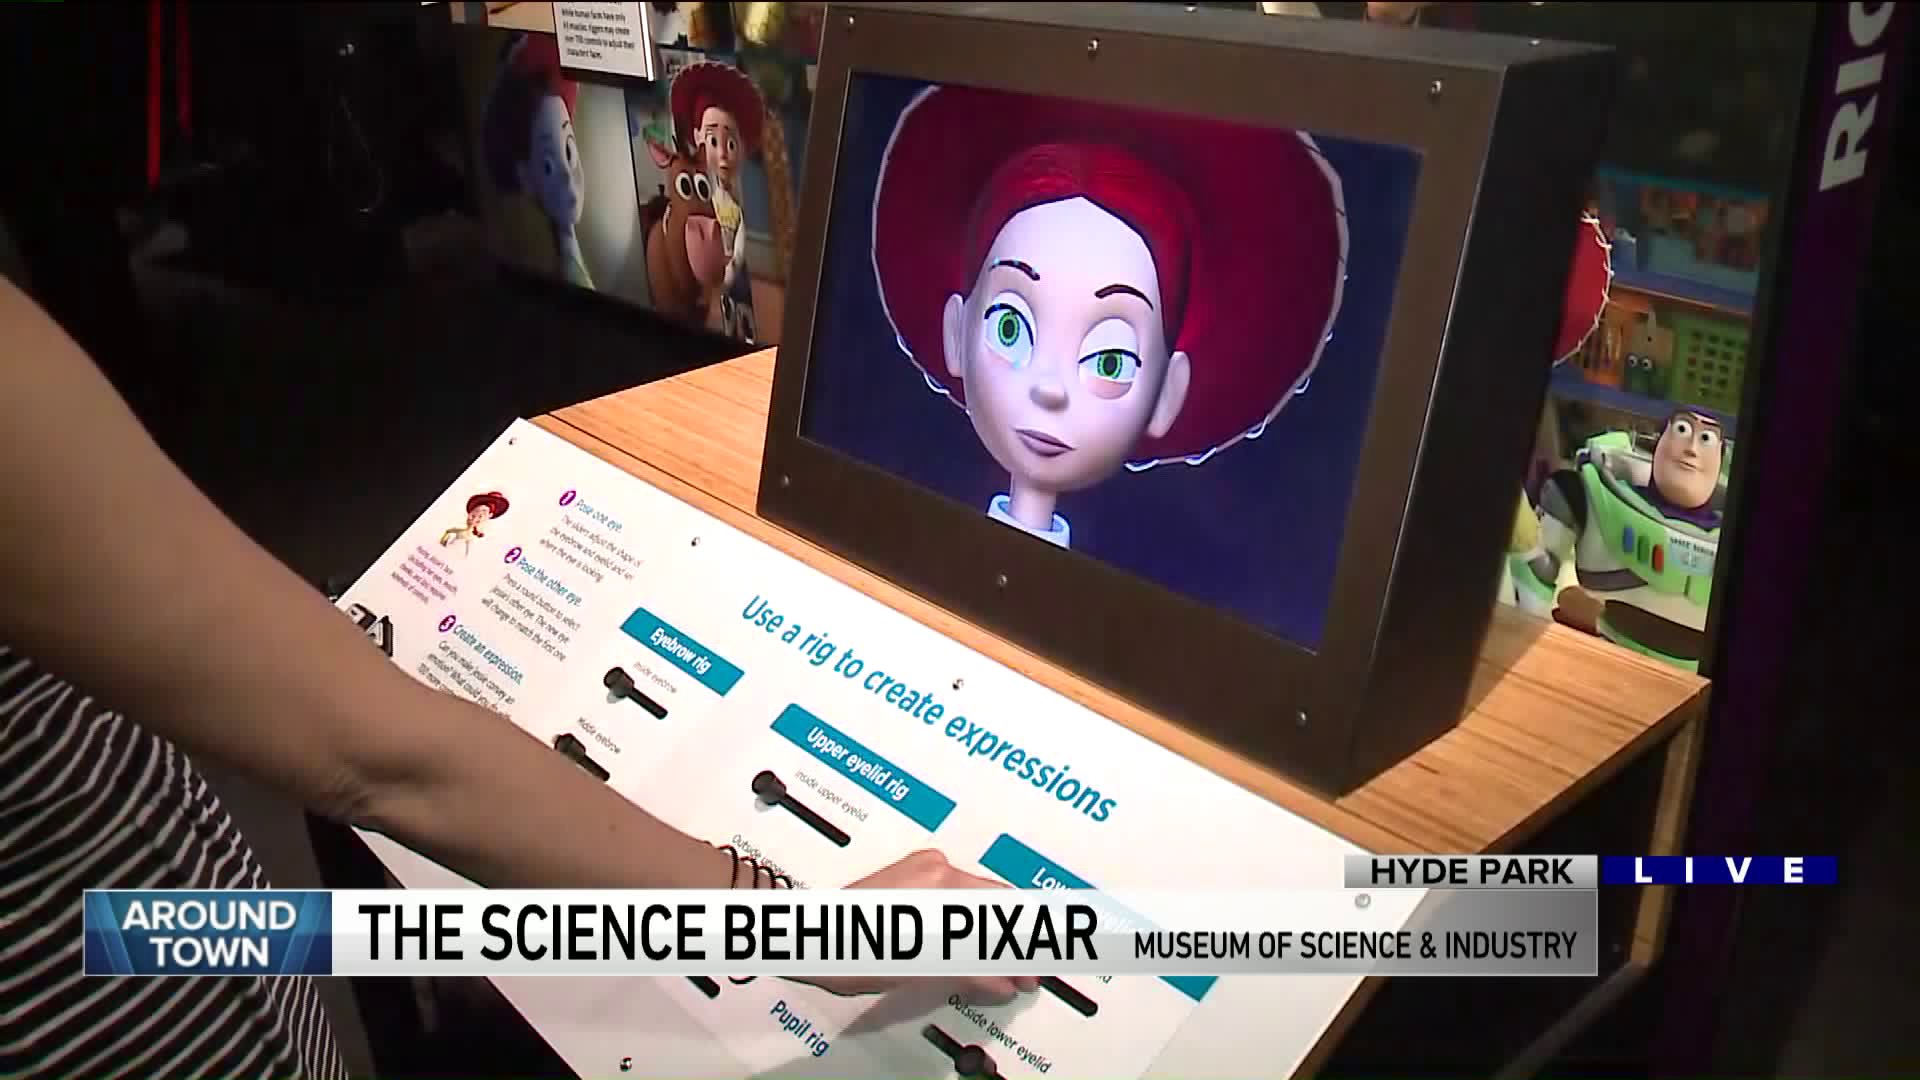 Around Town checks out The Science Behind Pixar exhibit at the Museum of Science and Industry